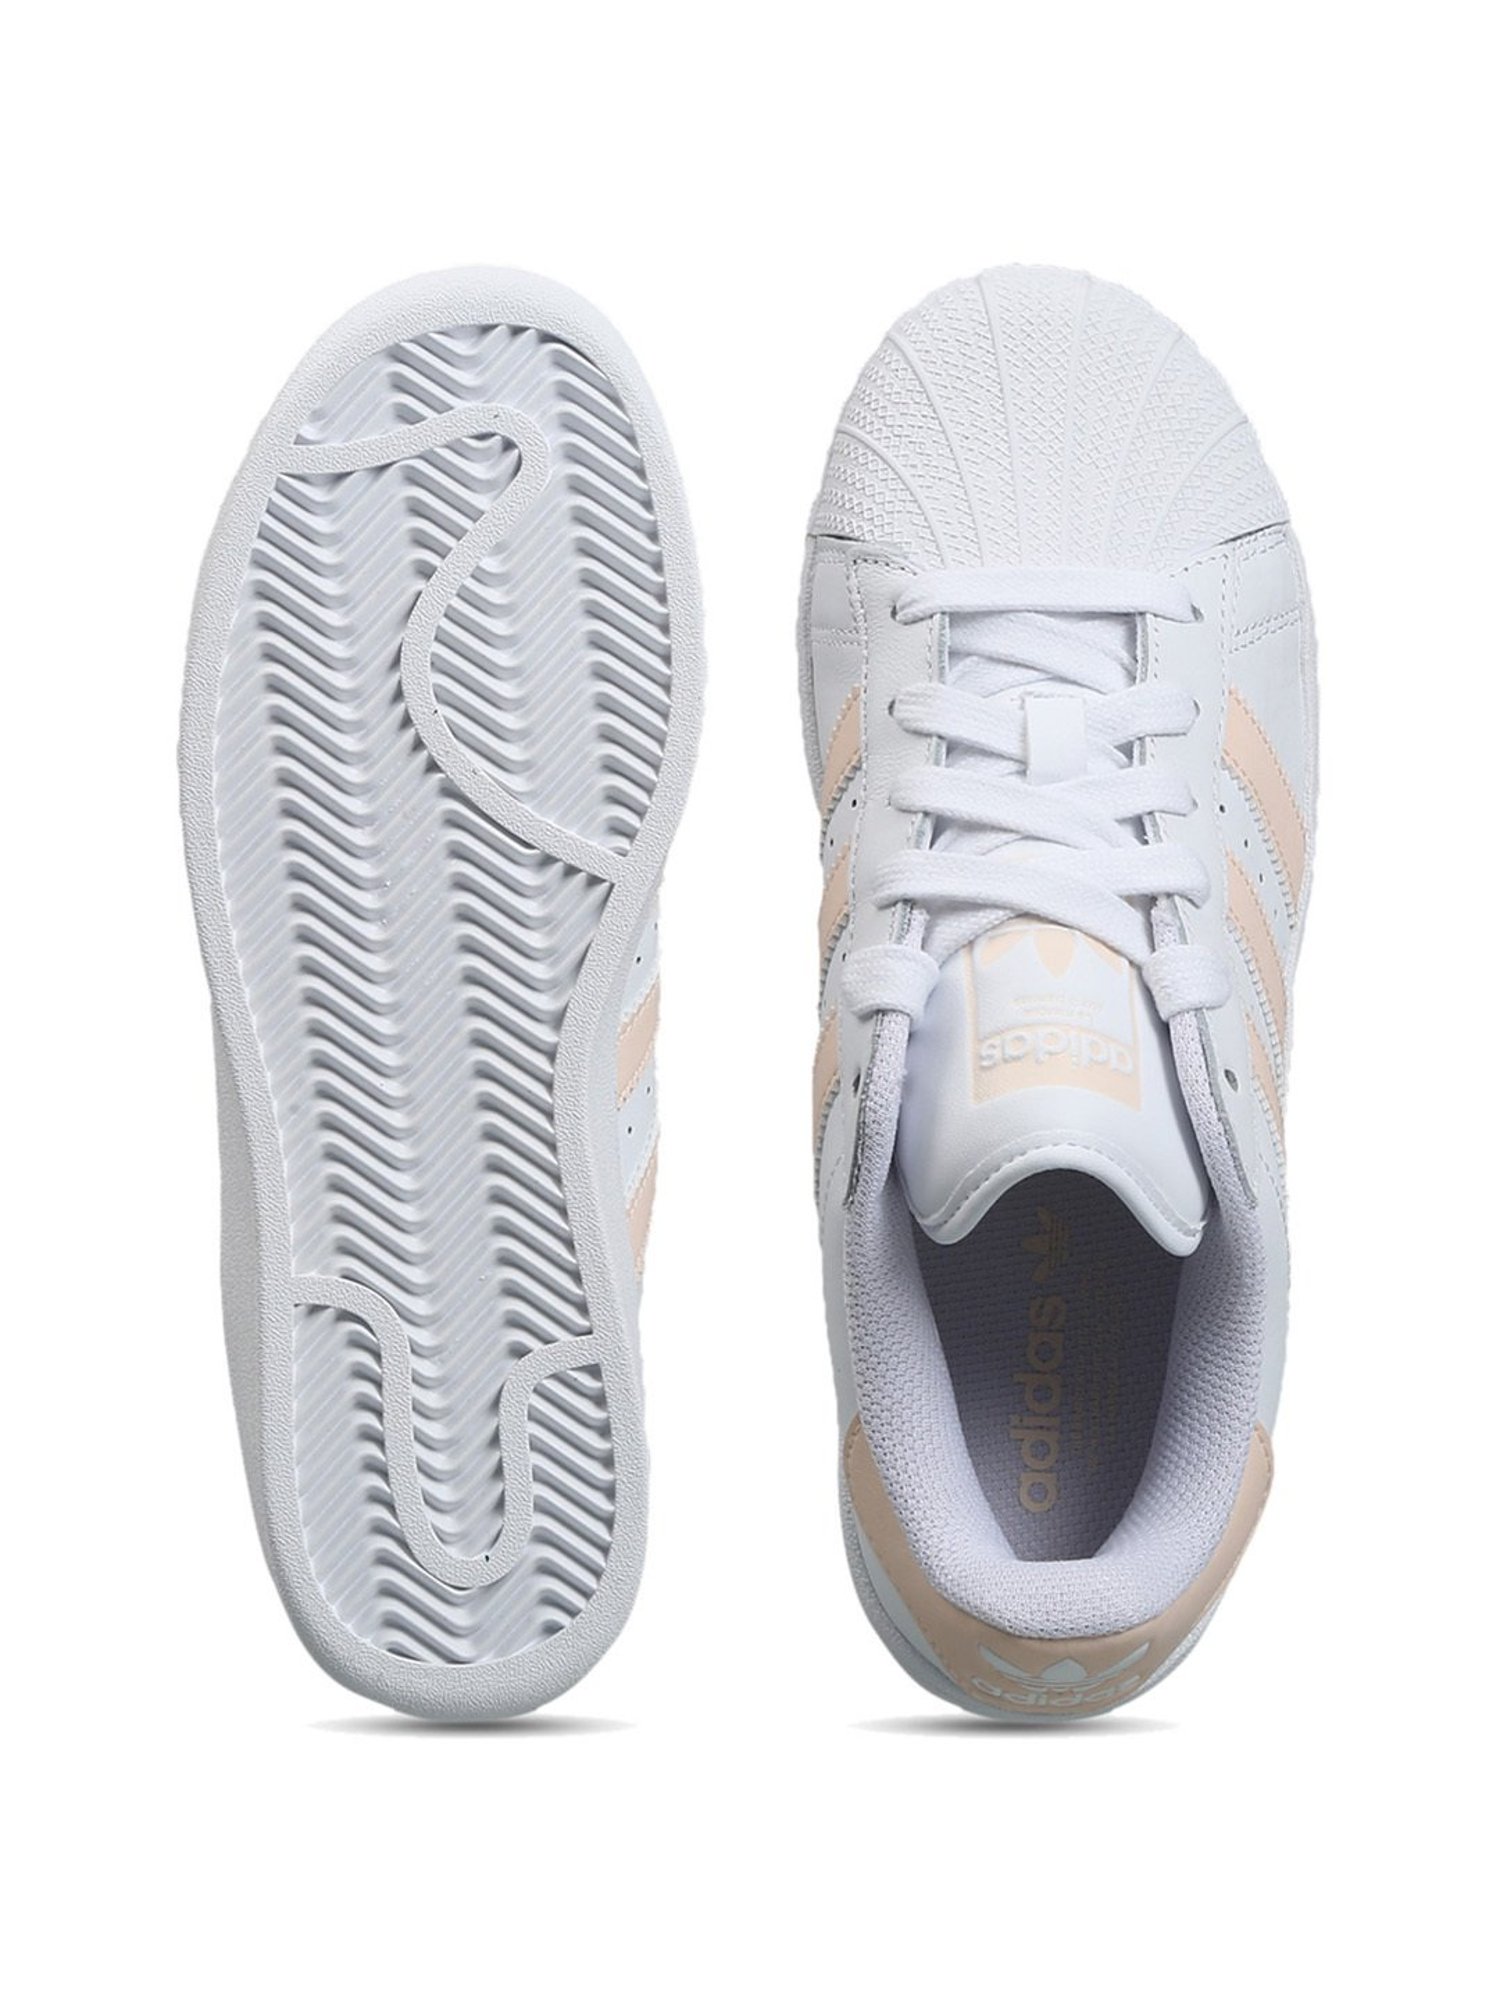 Buy Adidas Coneo QT White Sneakers for Women at Best Price @ Tata CLiQ